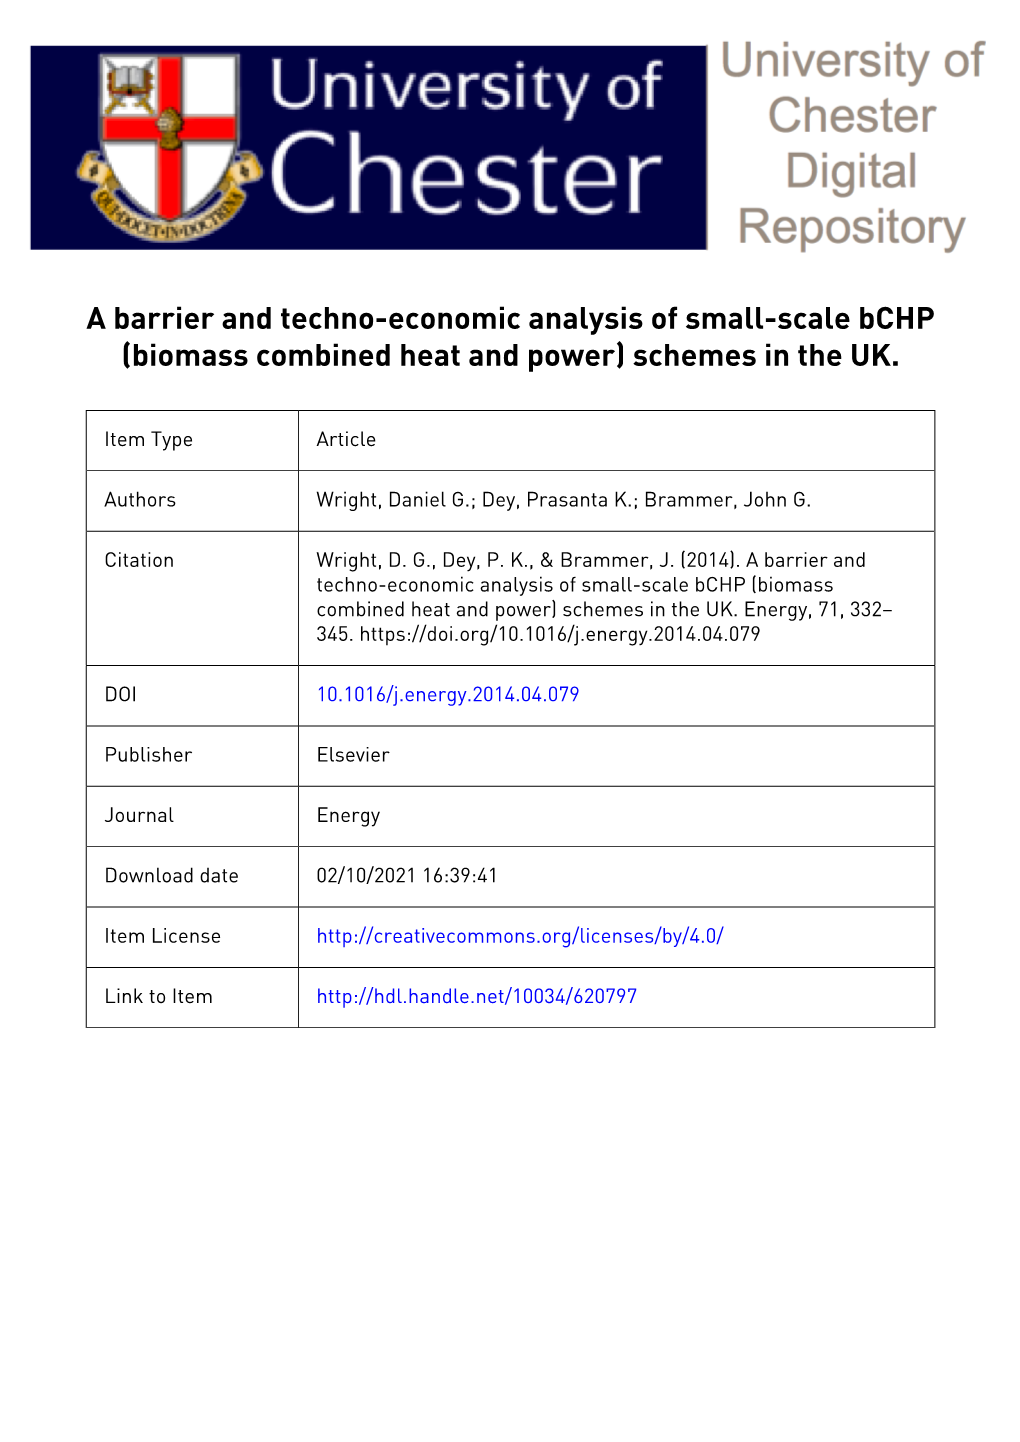 A Barrier and Techno-Economic Analysis of Small-Scale Bchp (Biomass Combined Heat and Power) Schemes in the UK